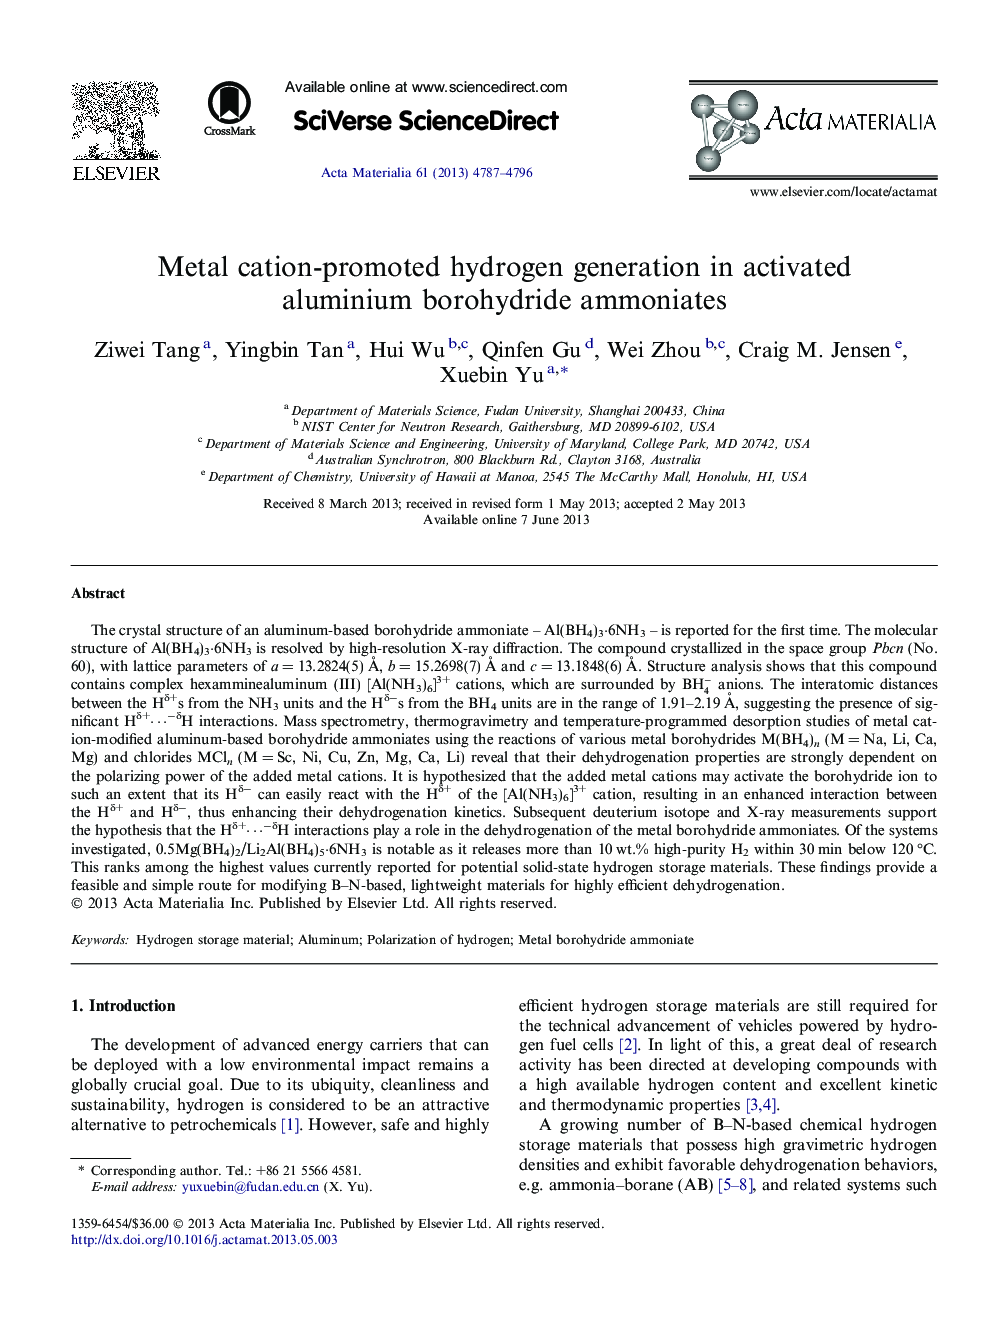 Metal cation-promoted hydrogen generation in activated aluminium borohydride ammoniates